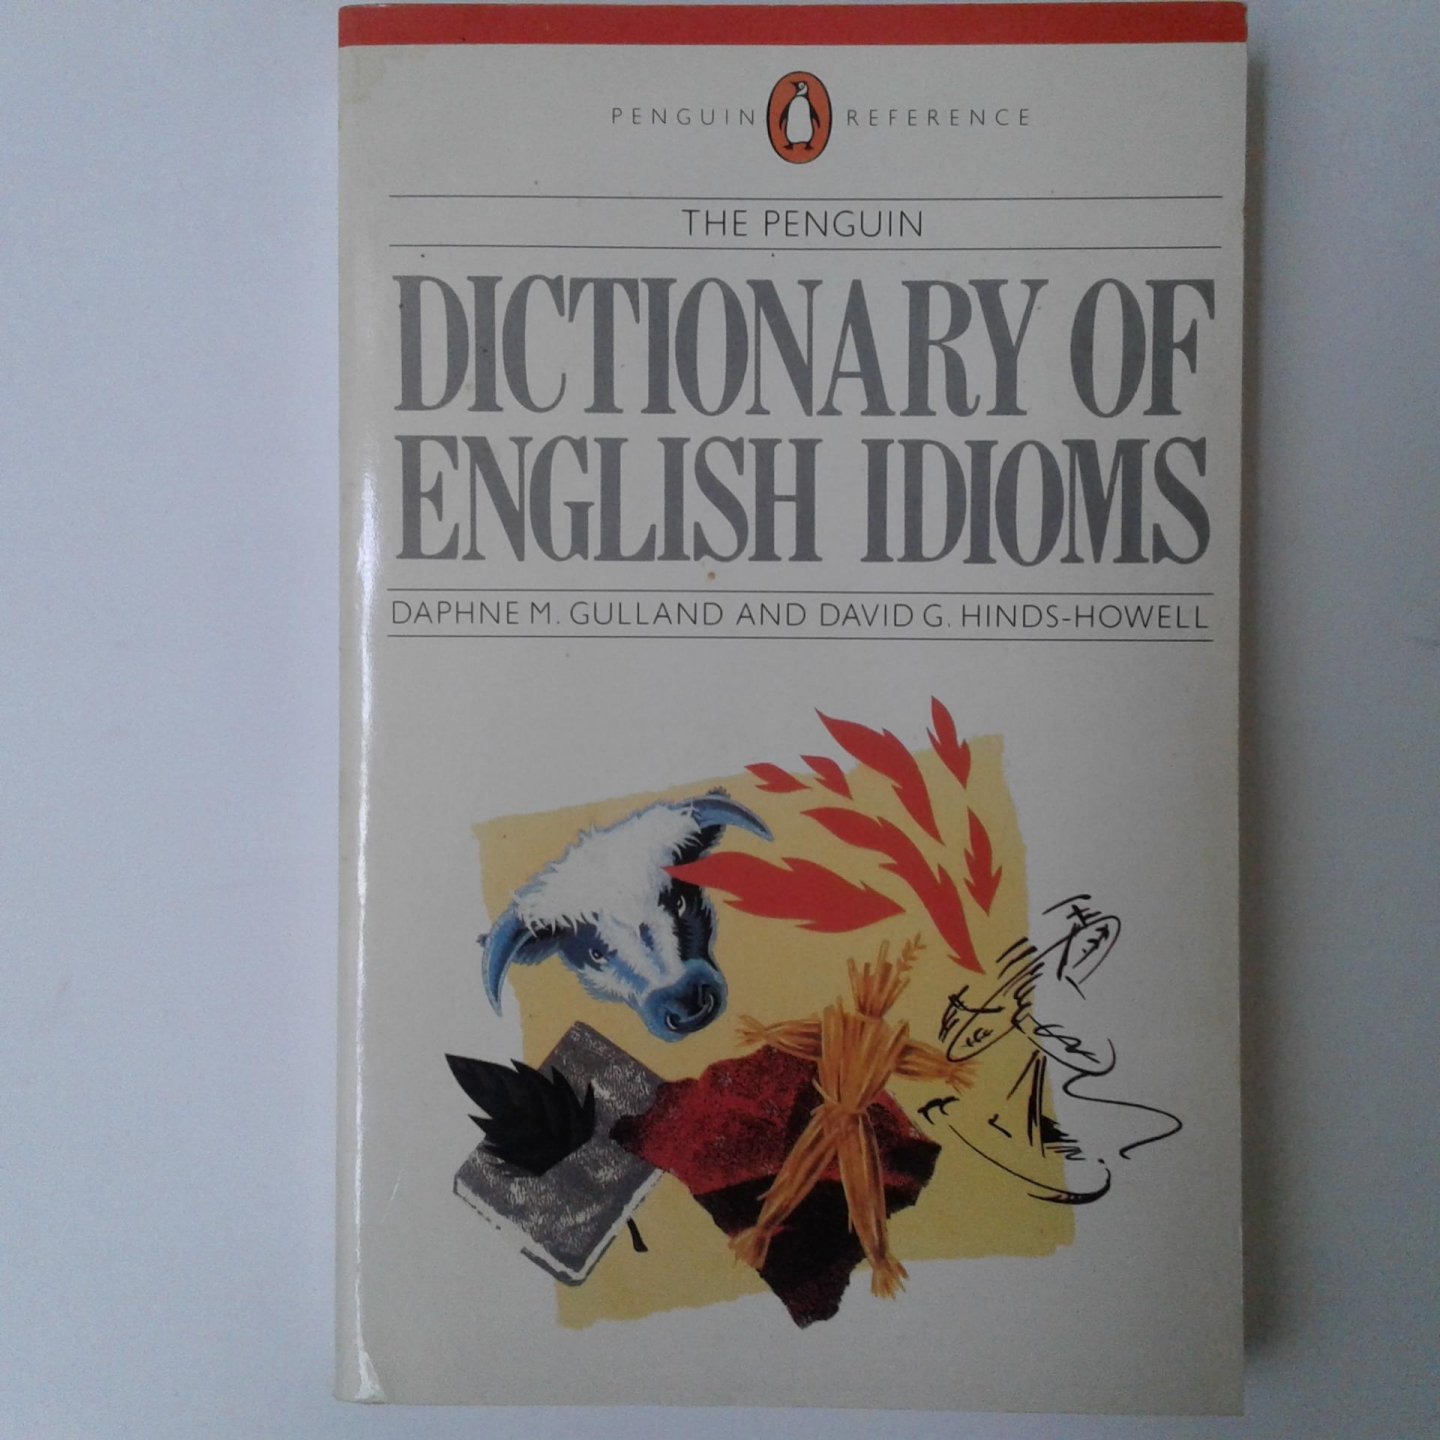 Bryson, Bill ; Daphne M. Gulland - 2 boeken ; Dictionary of Troublesome words ; Dictionary of English Idioms